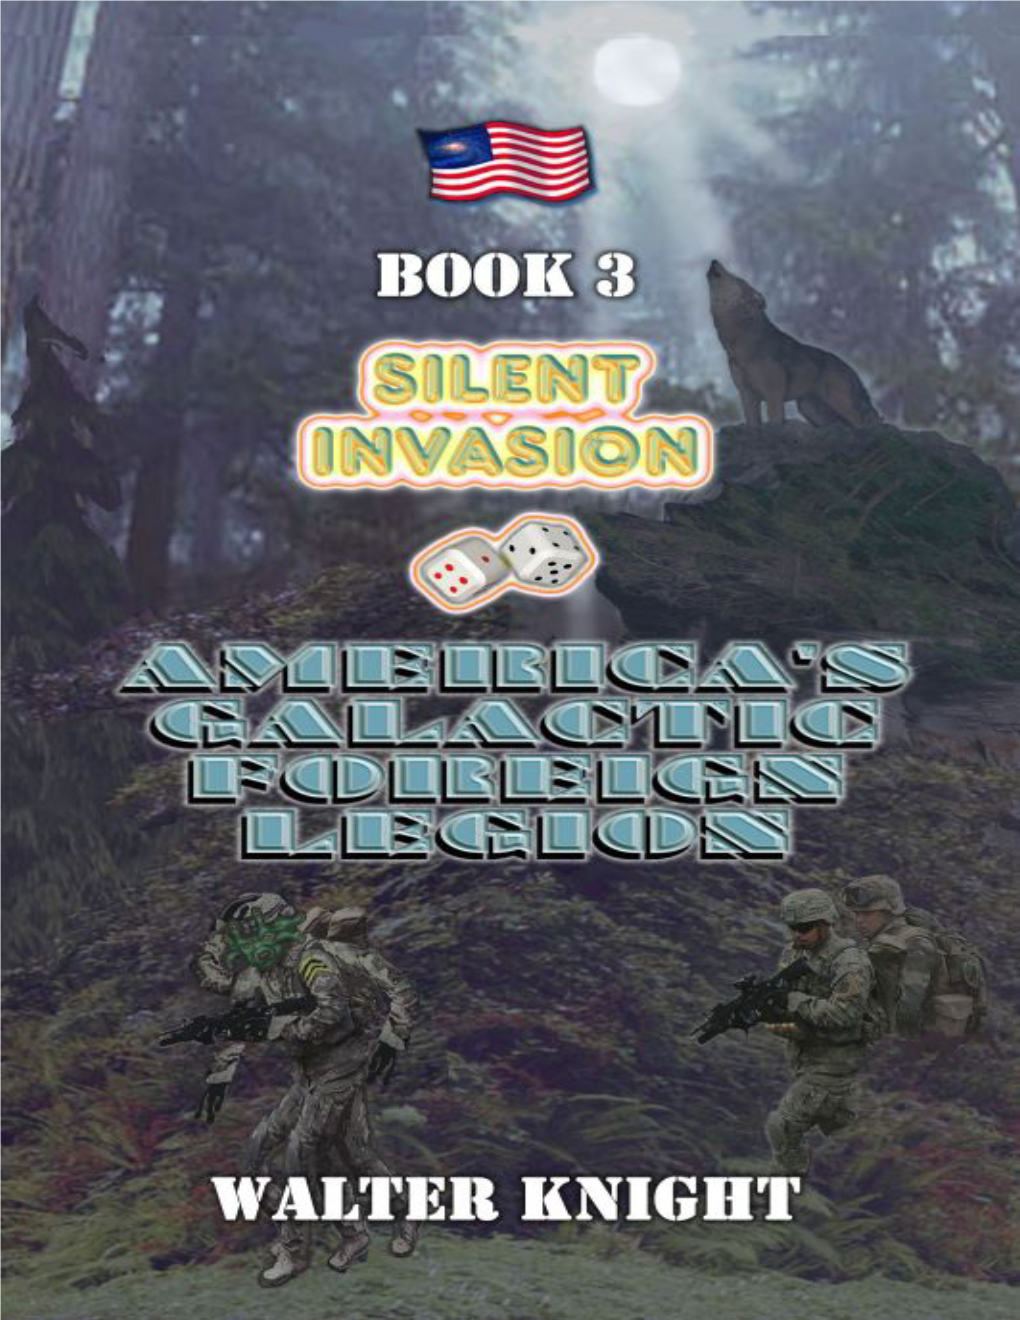 Silent Invasion by Walter Knight